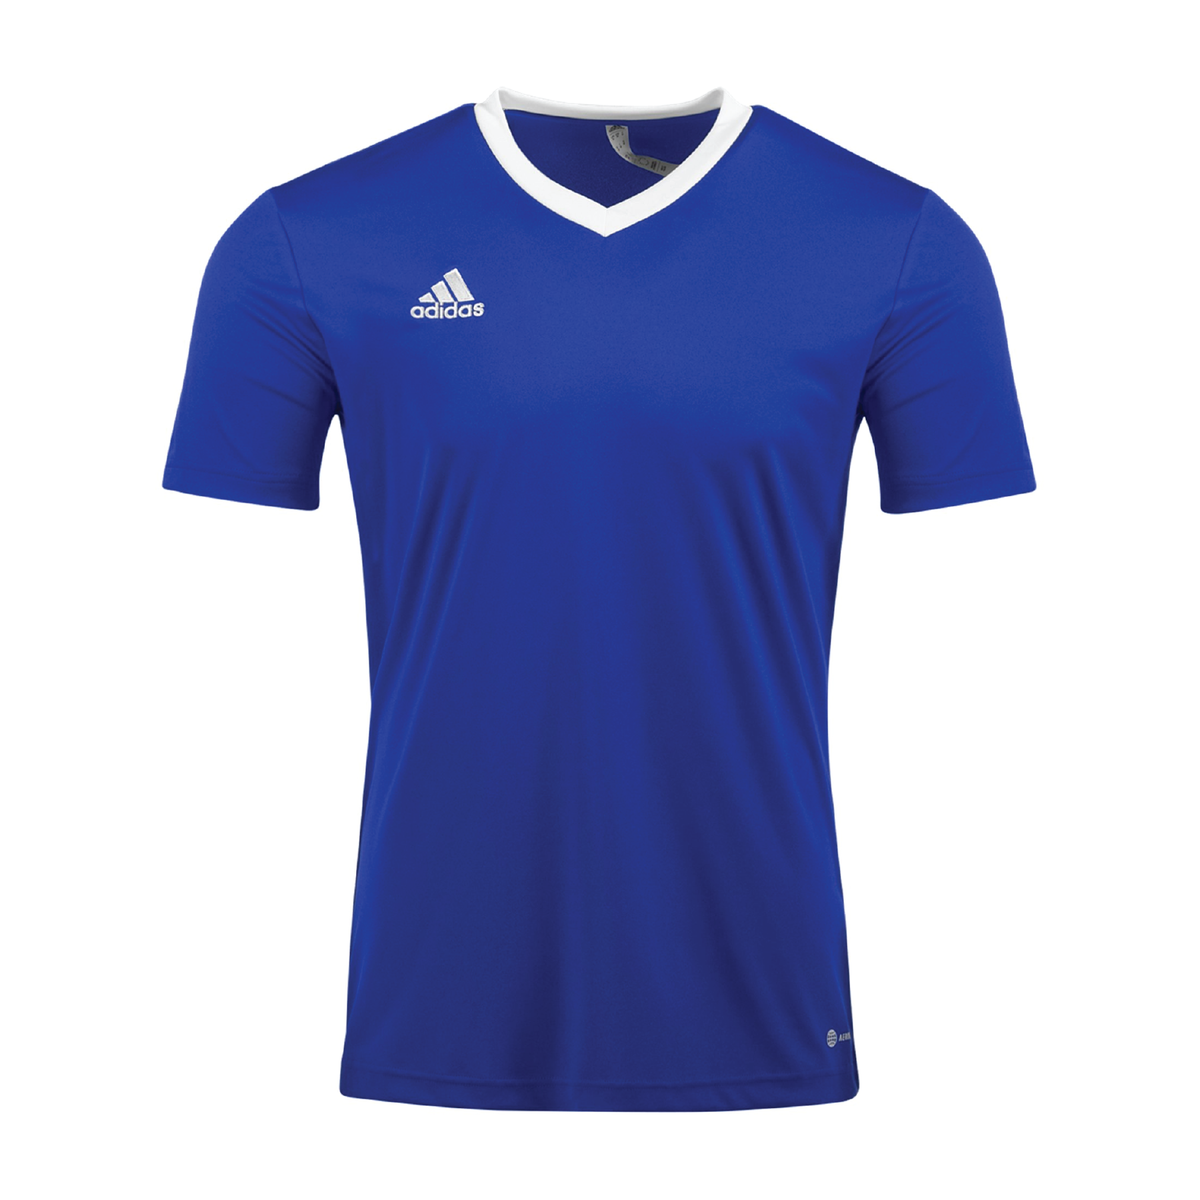 Adidas Entrada 22 Jersey in Blue - Youth M